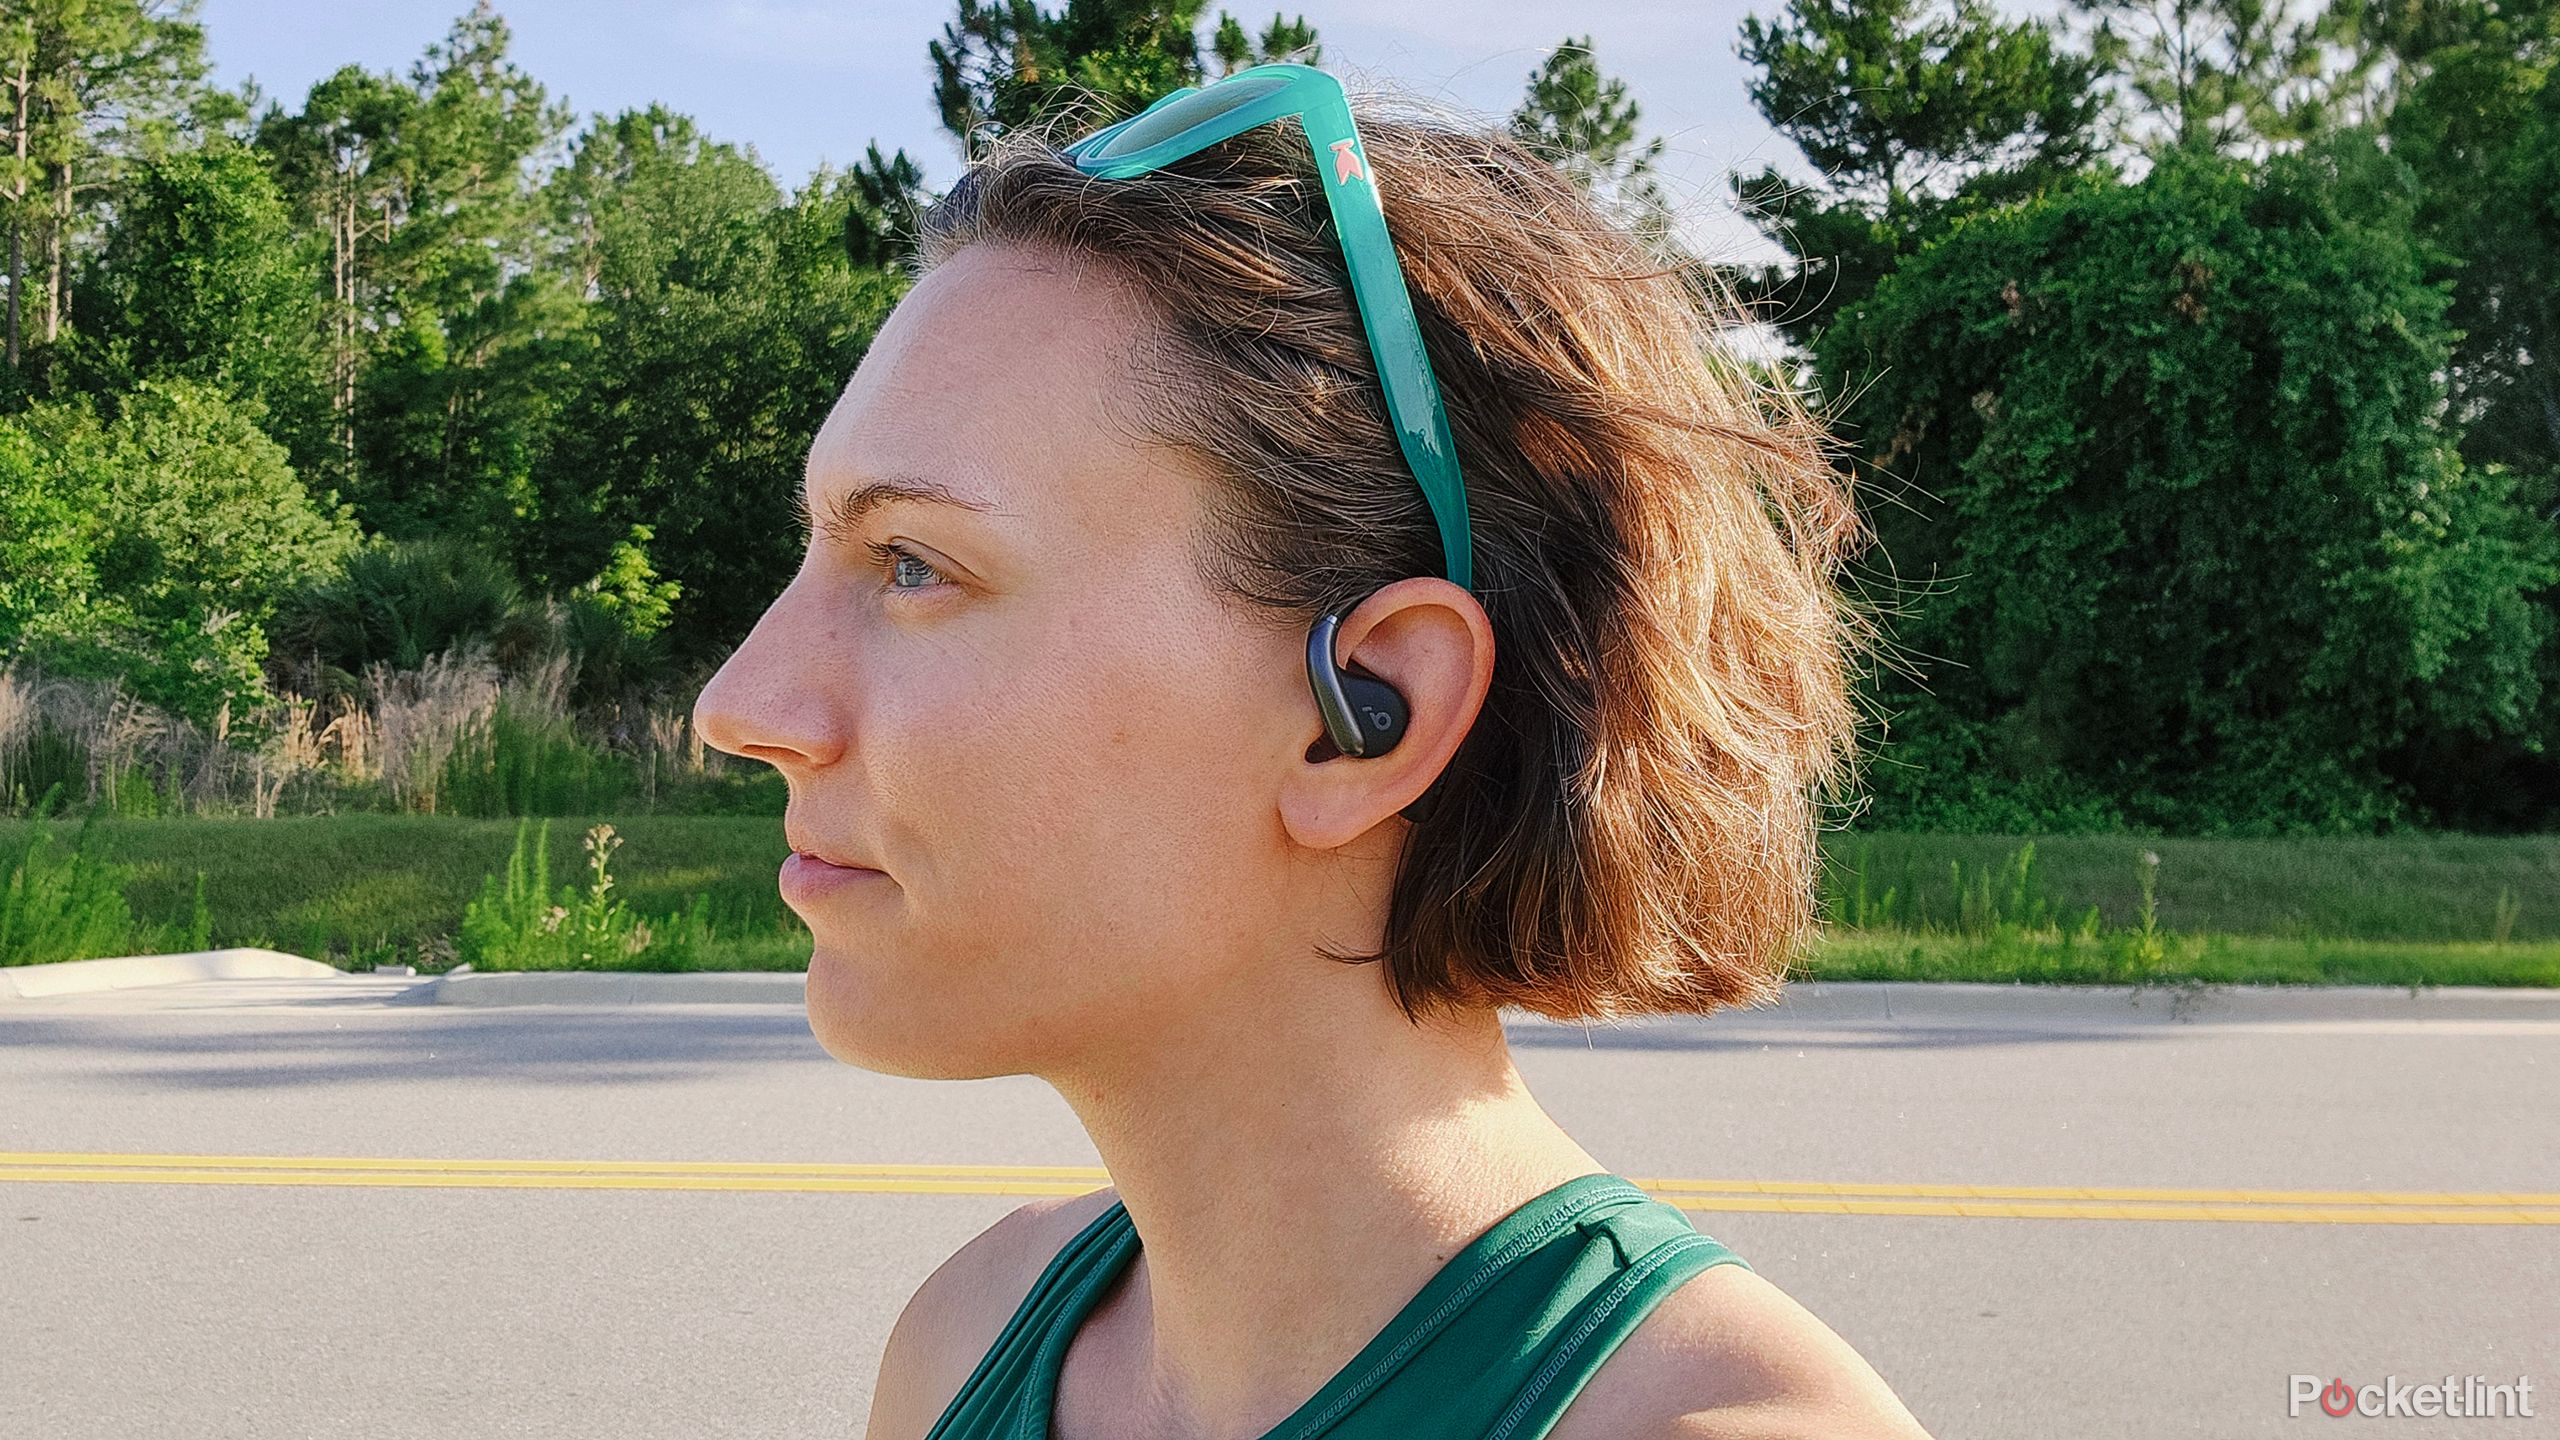 A woman stands in front of a road with forest behind it wearing the Soundcore AeroFit Open-Ear headphones.